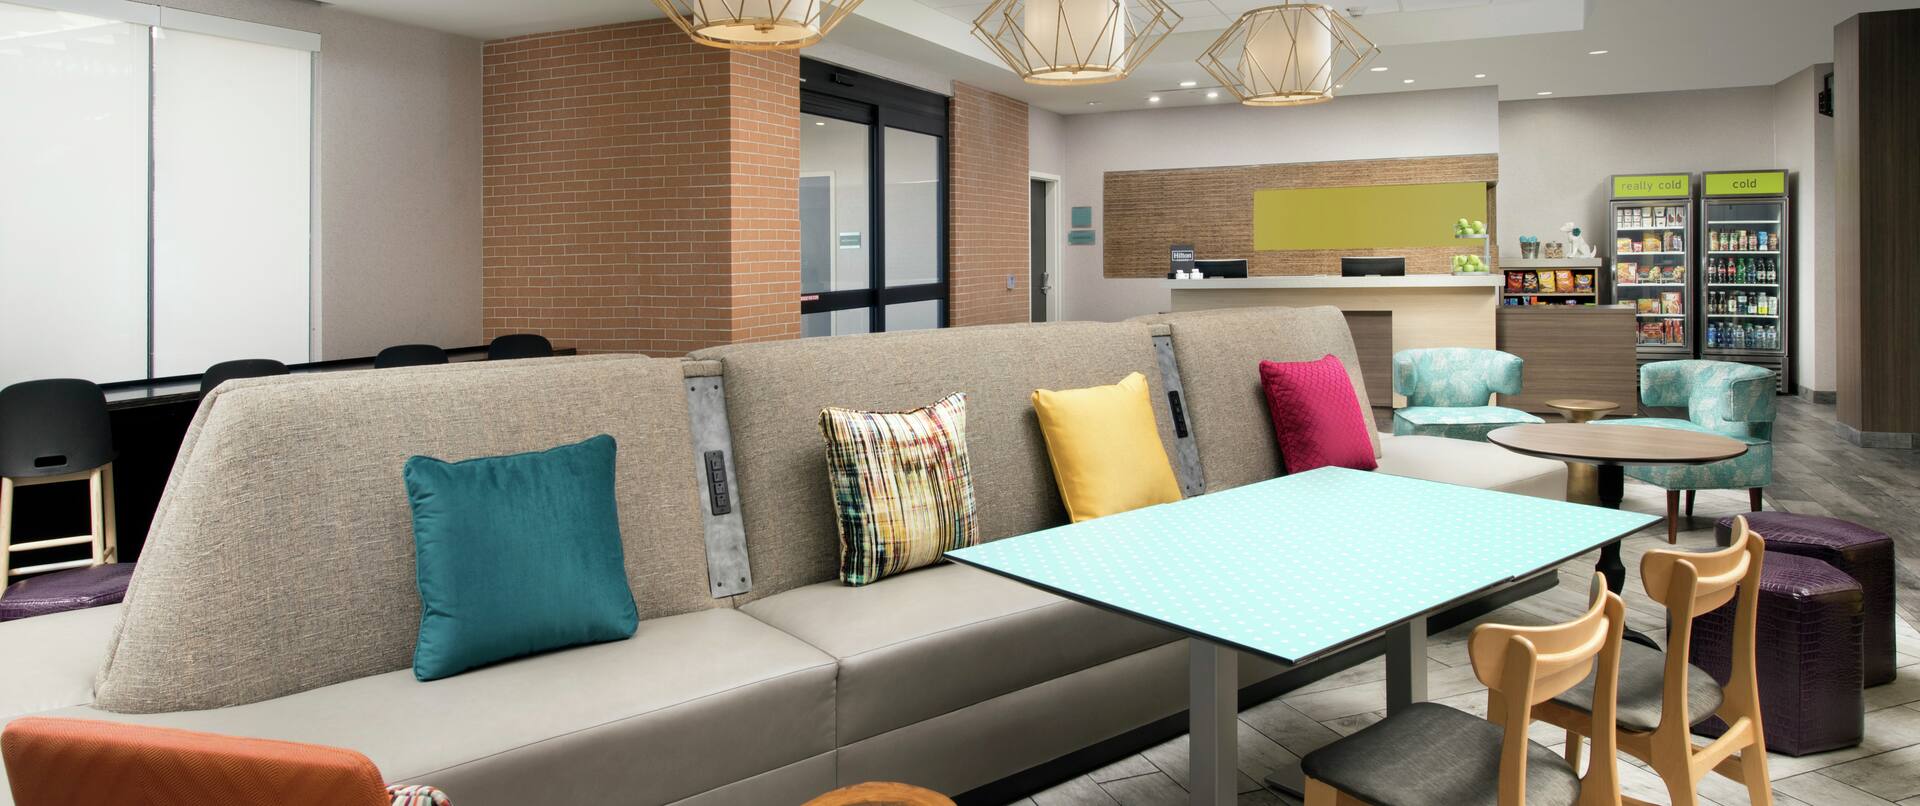 Lounge Seating in Lobby With View of Entrance, Front Desk, and Snack Shop